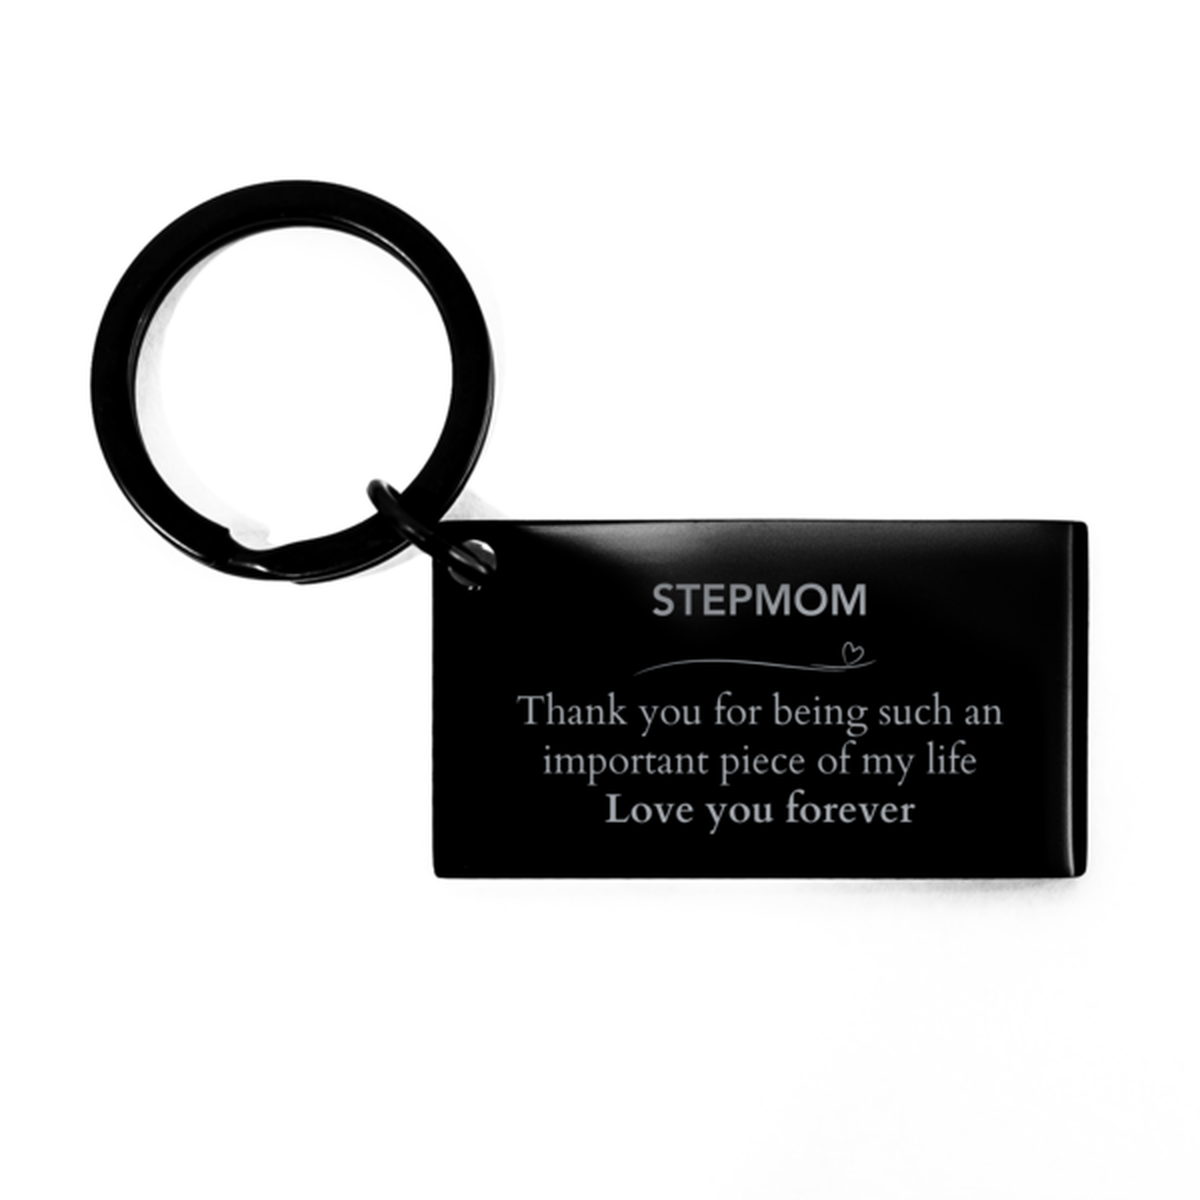 Appropriate Stepmom Keychain Epic Birthday Gifts for Stepmom Thank you for being such an important piece of my life Stepmom Christmas Mothers Fathers Day